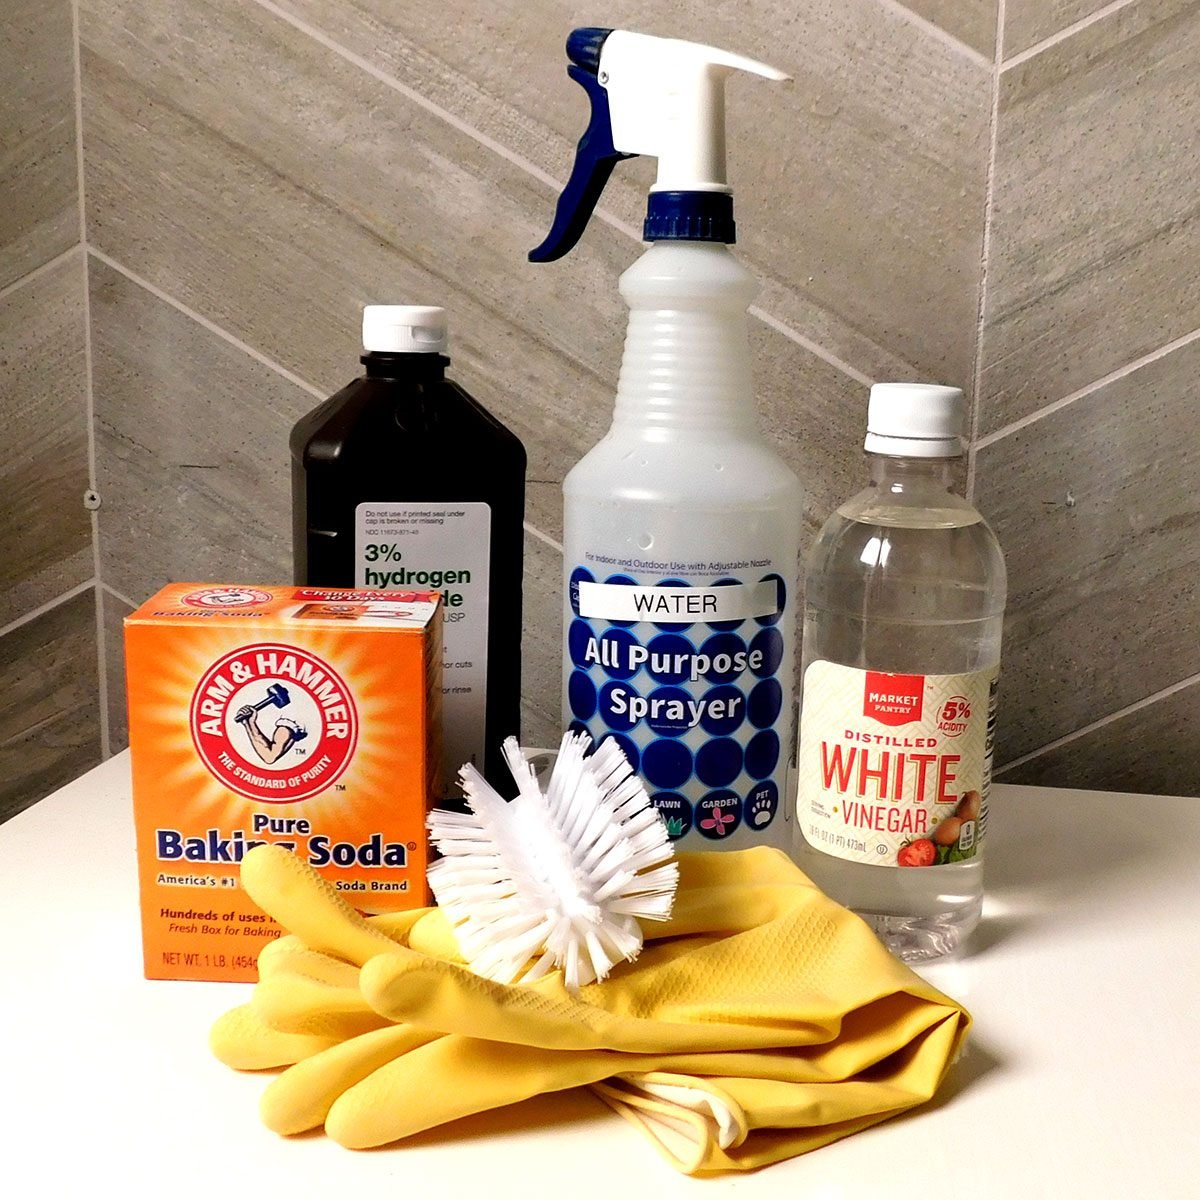 The Ultimate Guide to Cleaning Grout: 10 DIY Tile & Grout Cleaners Tested -  Bren Did